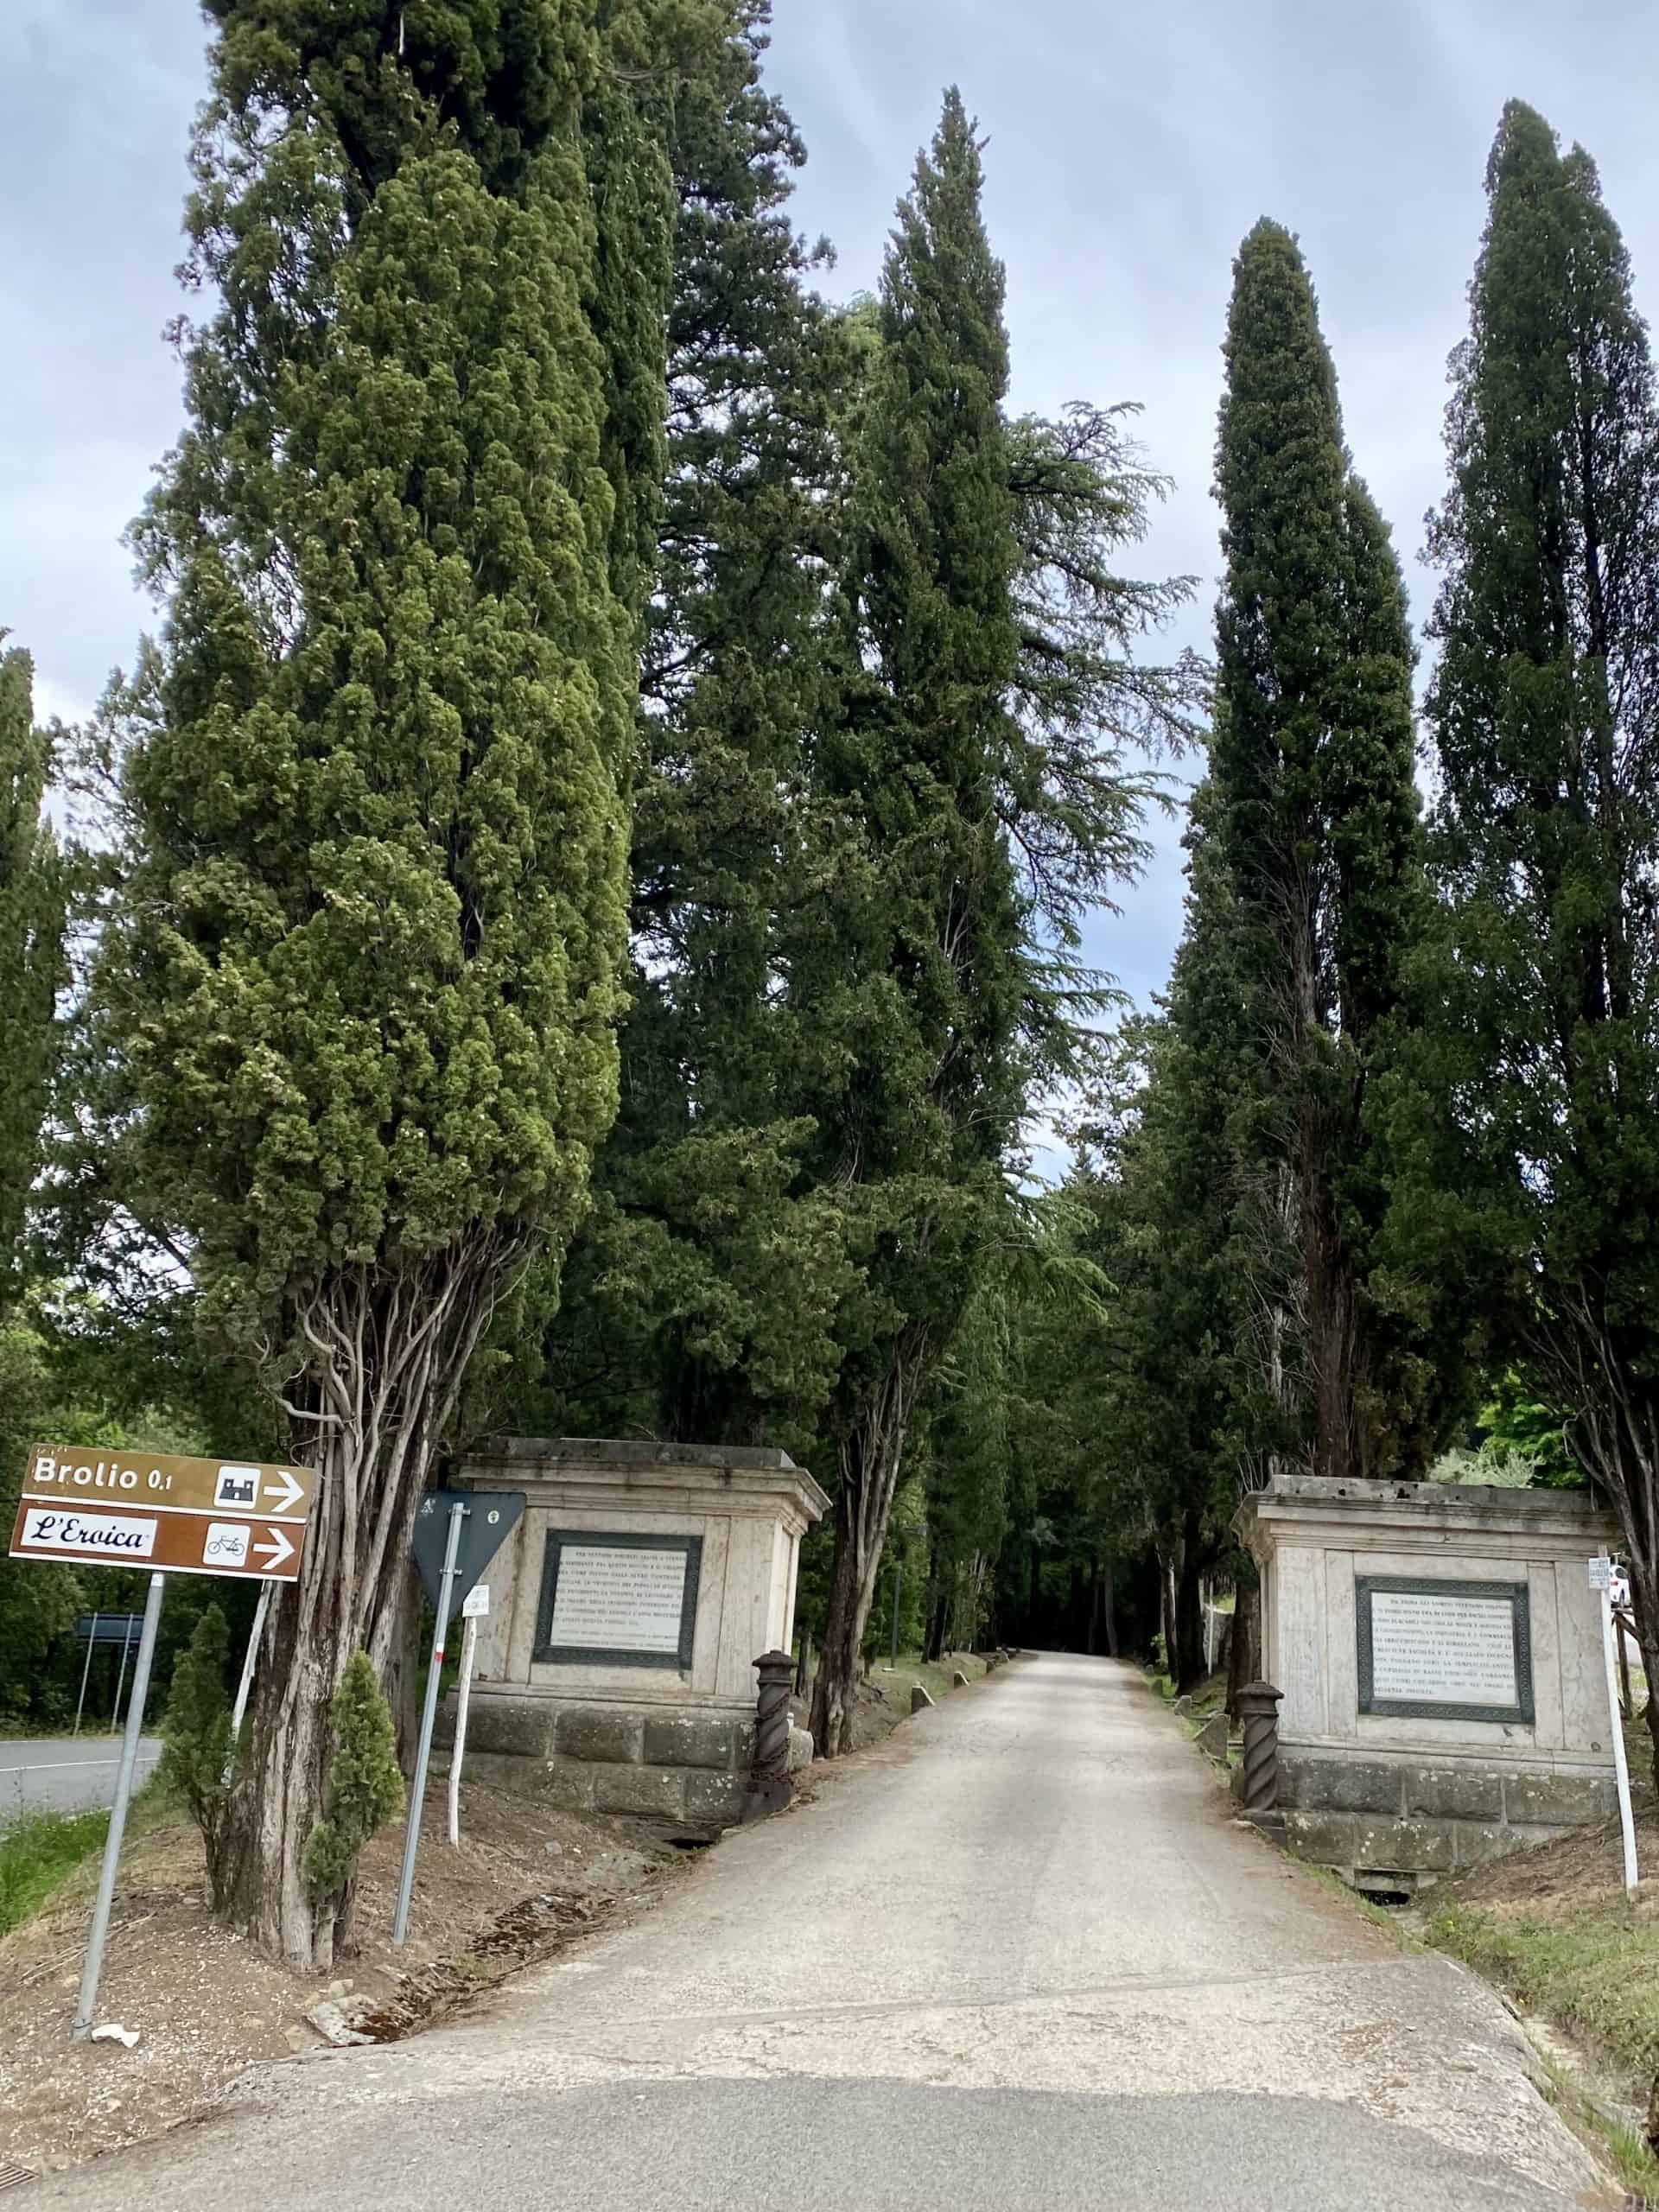 Entrance road to Castello di Brolio (Brolio Castle).  Two huge stone pillars are on either side of the road.  There are brown road signs on the left for Brolio and L'Eroica.  The road goes uphill and there are coniferous trees on either side.